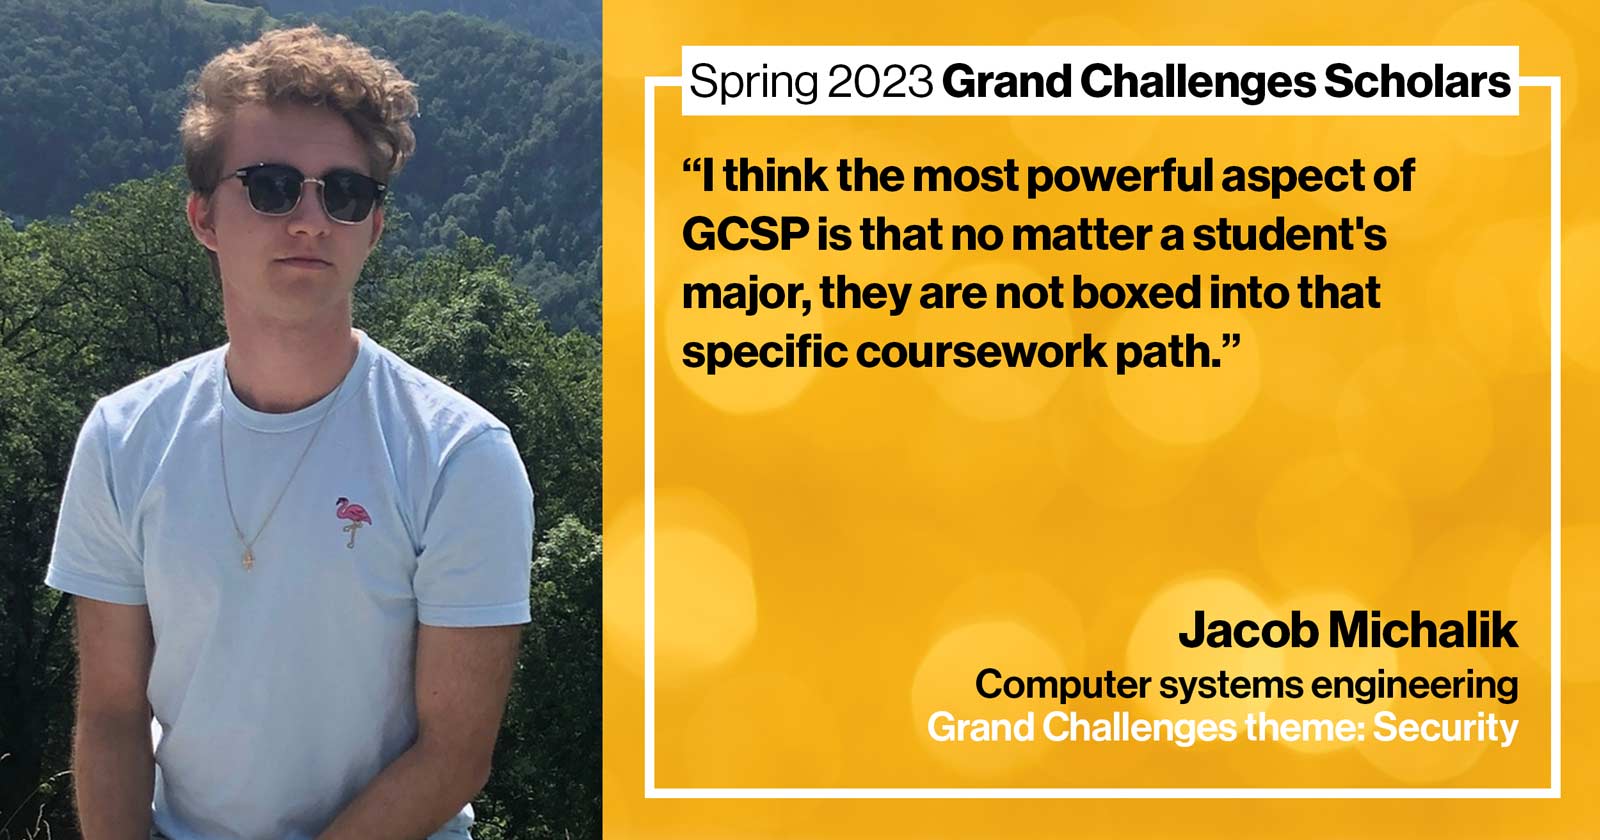 "Jacob Michalik Computer systems engineering Grand Challenge: Security Quote: “I think the most powerful aspect of GCSP is that no matter a student's major, they are not boxed into that specific coursework path.”"